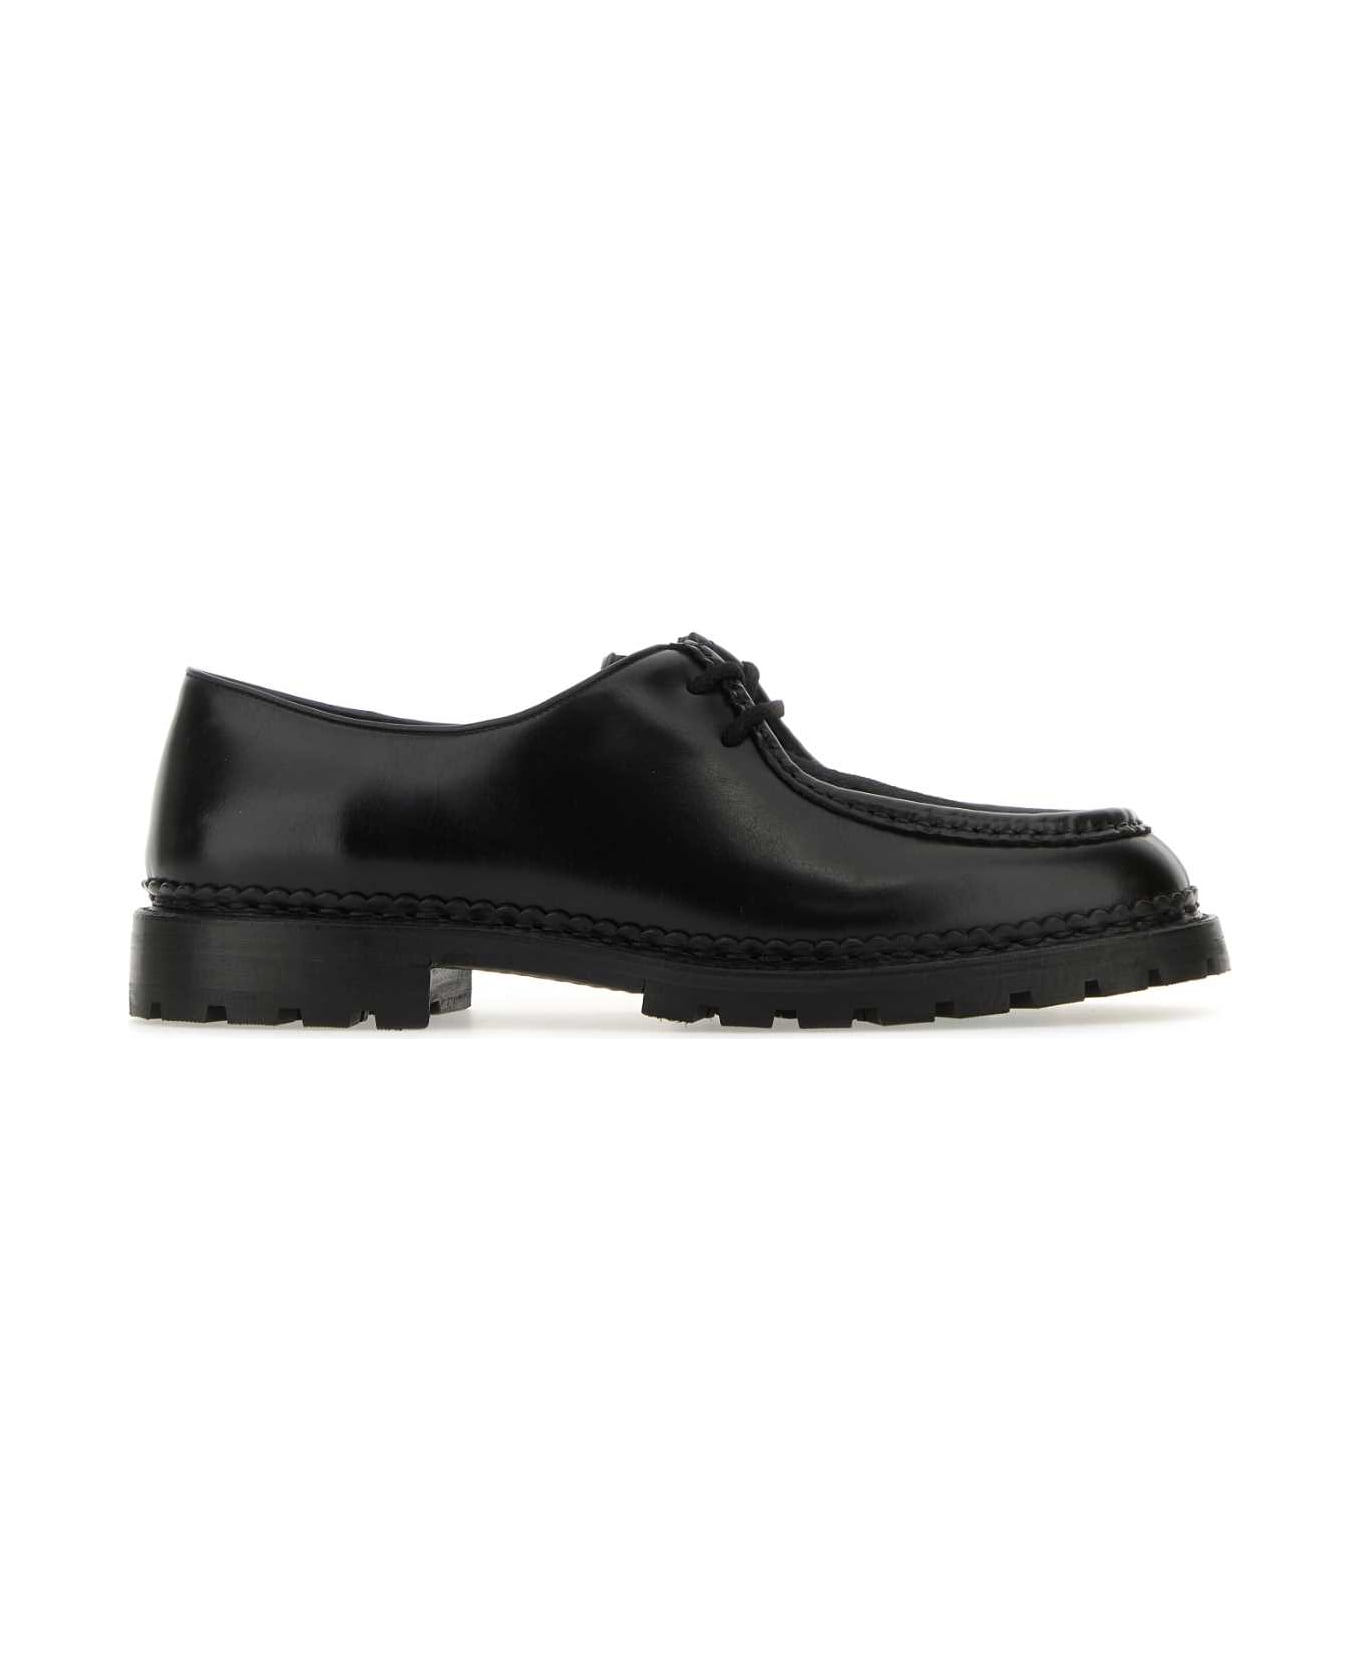 Saint Laurent Black Leather And Calf Hair Lace-up Shoes - NERONERONERO